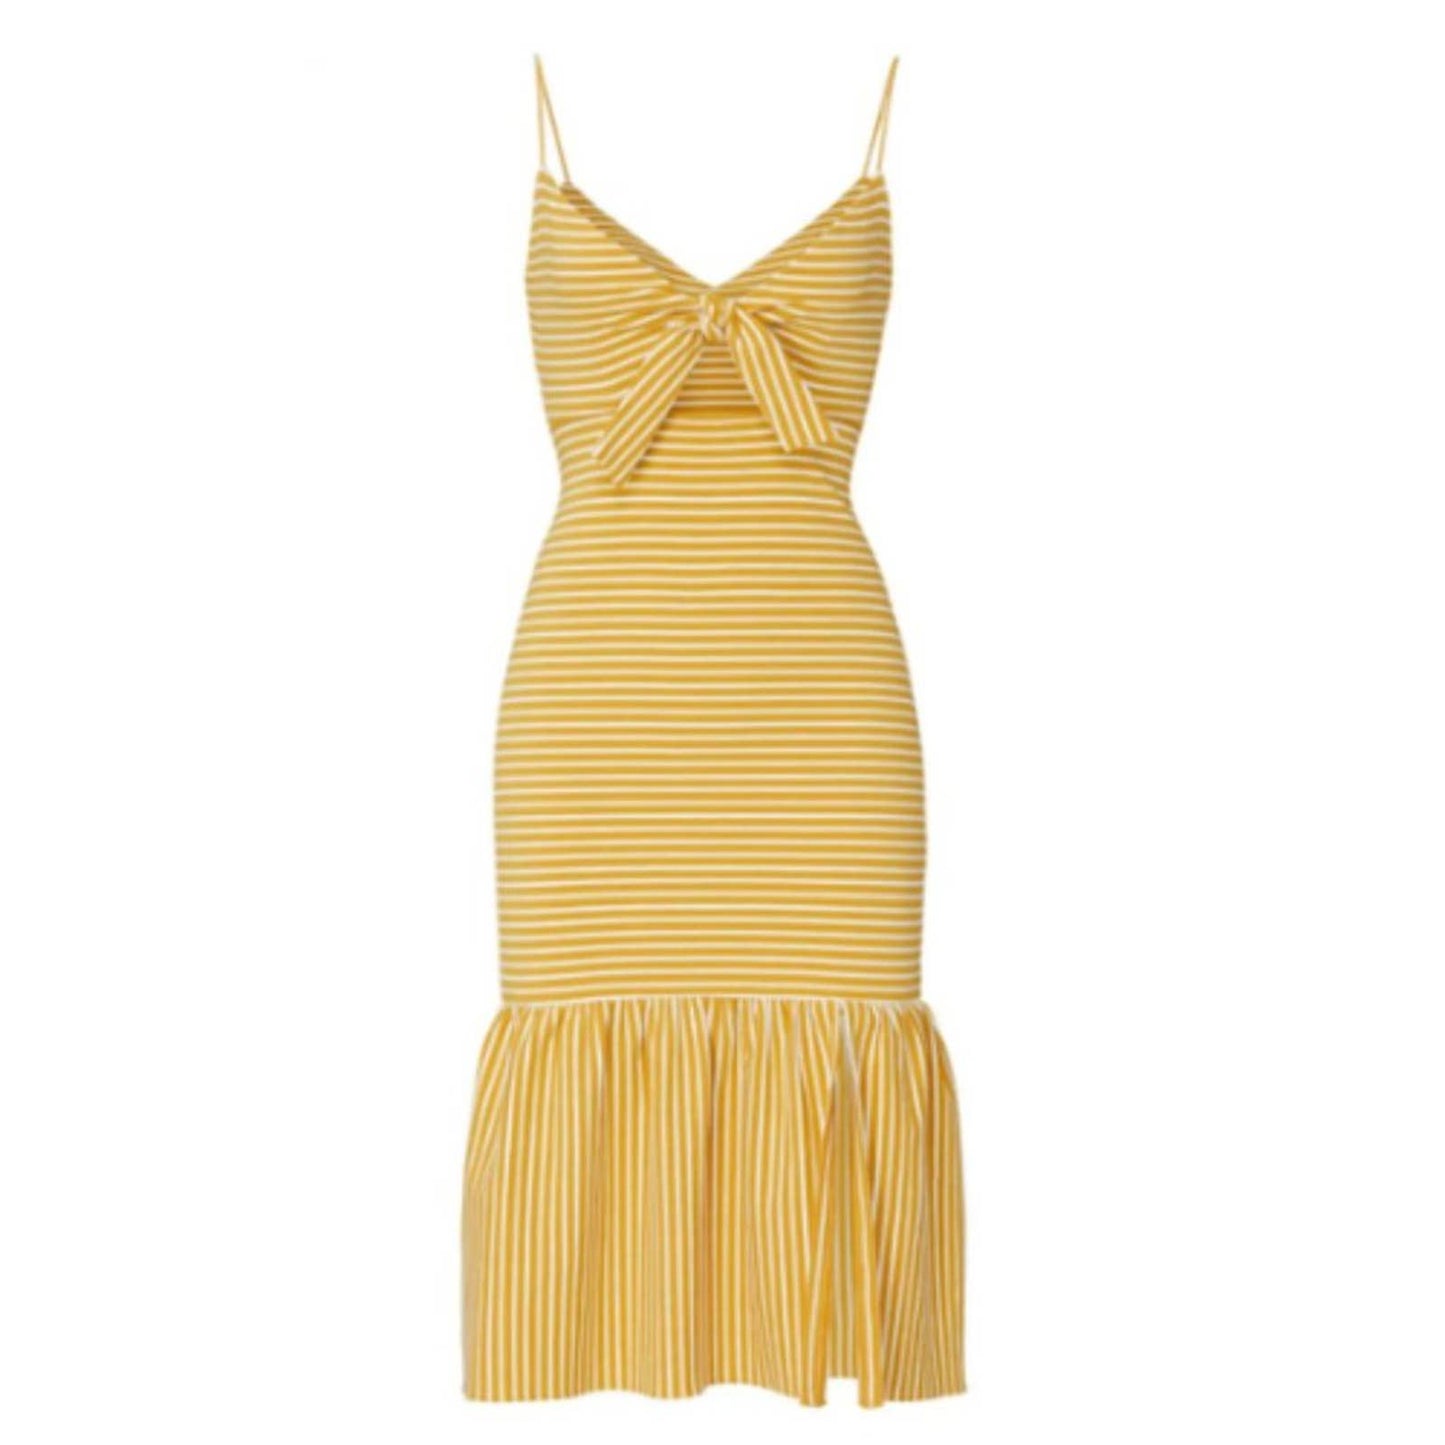 Saylor Doris Dress in Golden Yellow and White Stripe Size Small